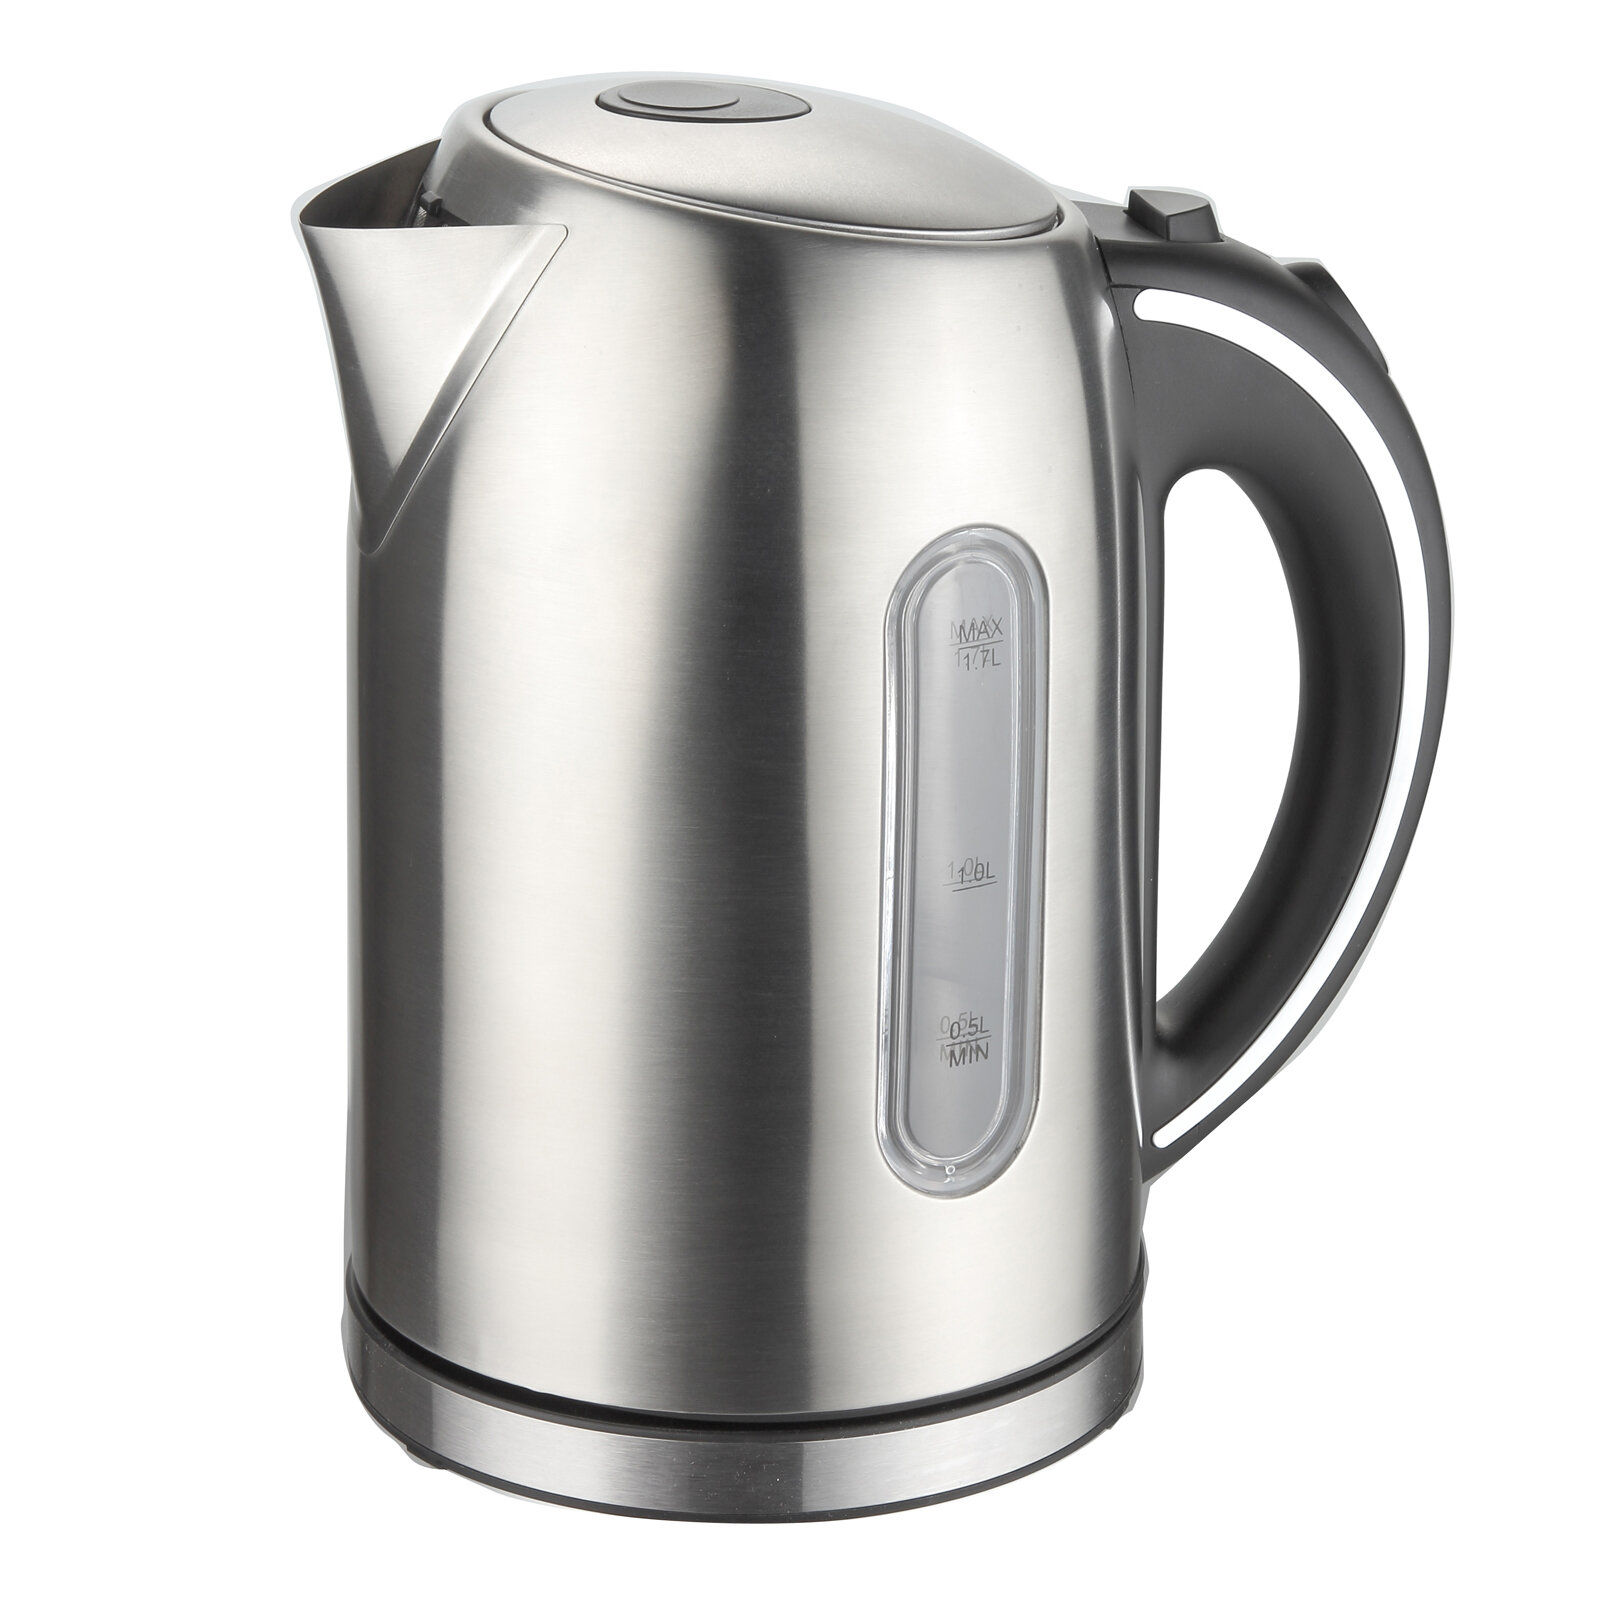  Haden Dorset Stainless Steel Electric Kettle - 1.7L (7 Cup) Tea  Kettle with Auto Shut-Off and Boil-Dry Protection - Red: Home & Kitchen